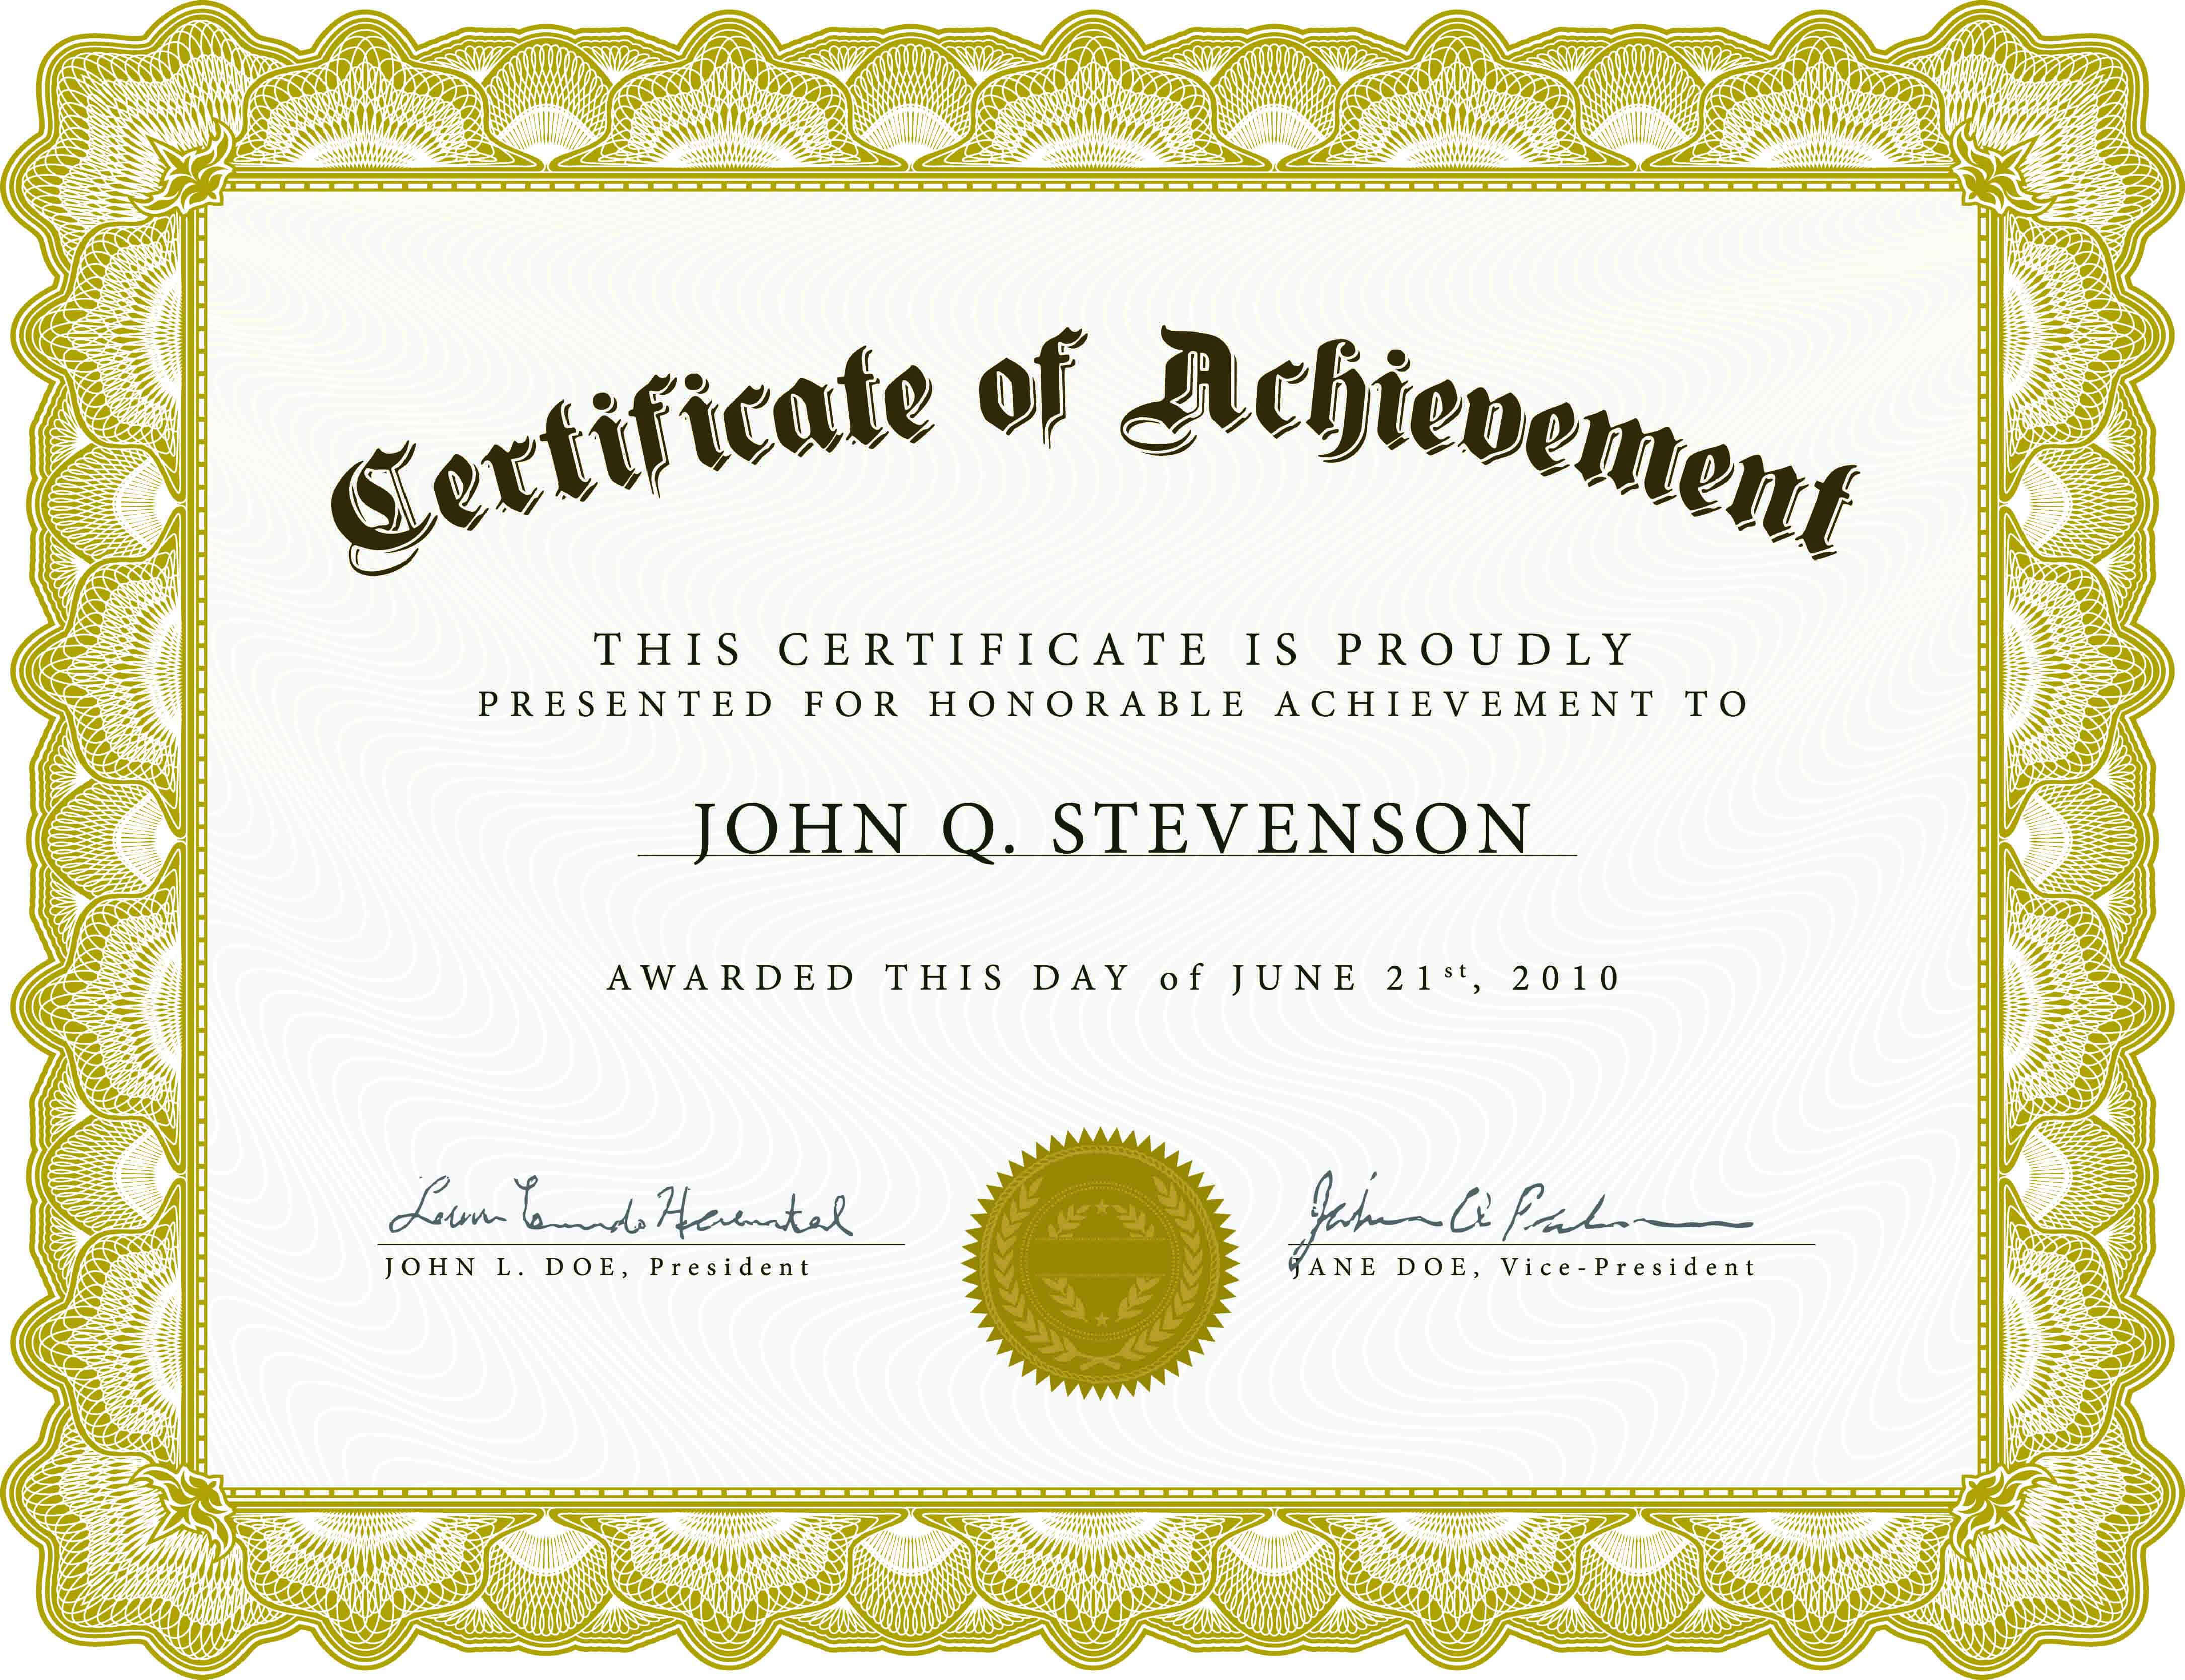 Certificate Of Academic Achievement Template | Photo Stock Within Certificate Of Excellence Template Free Download